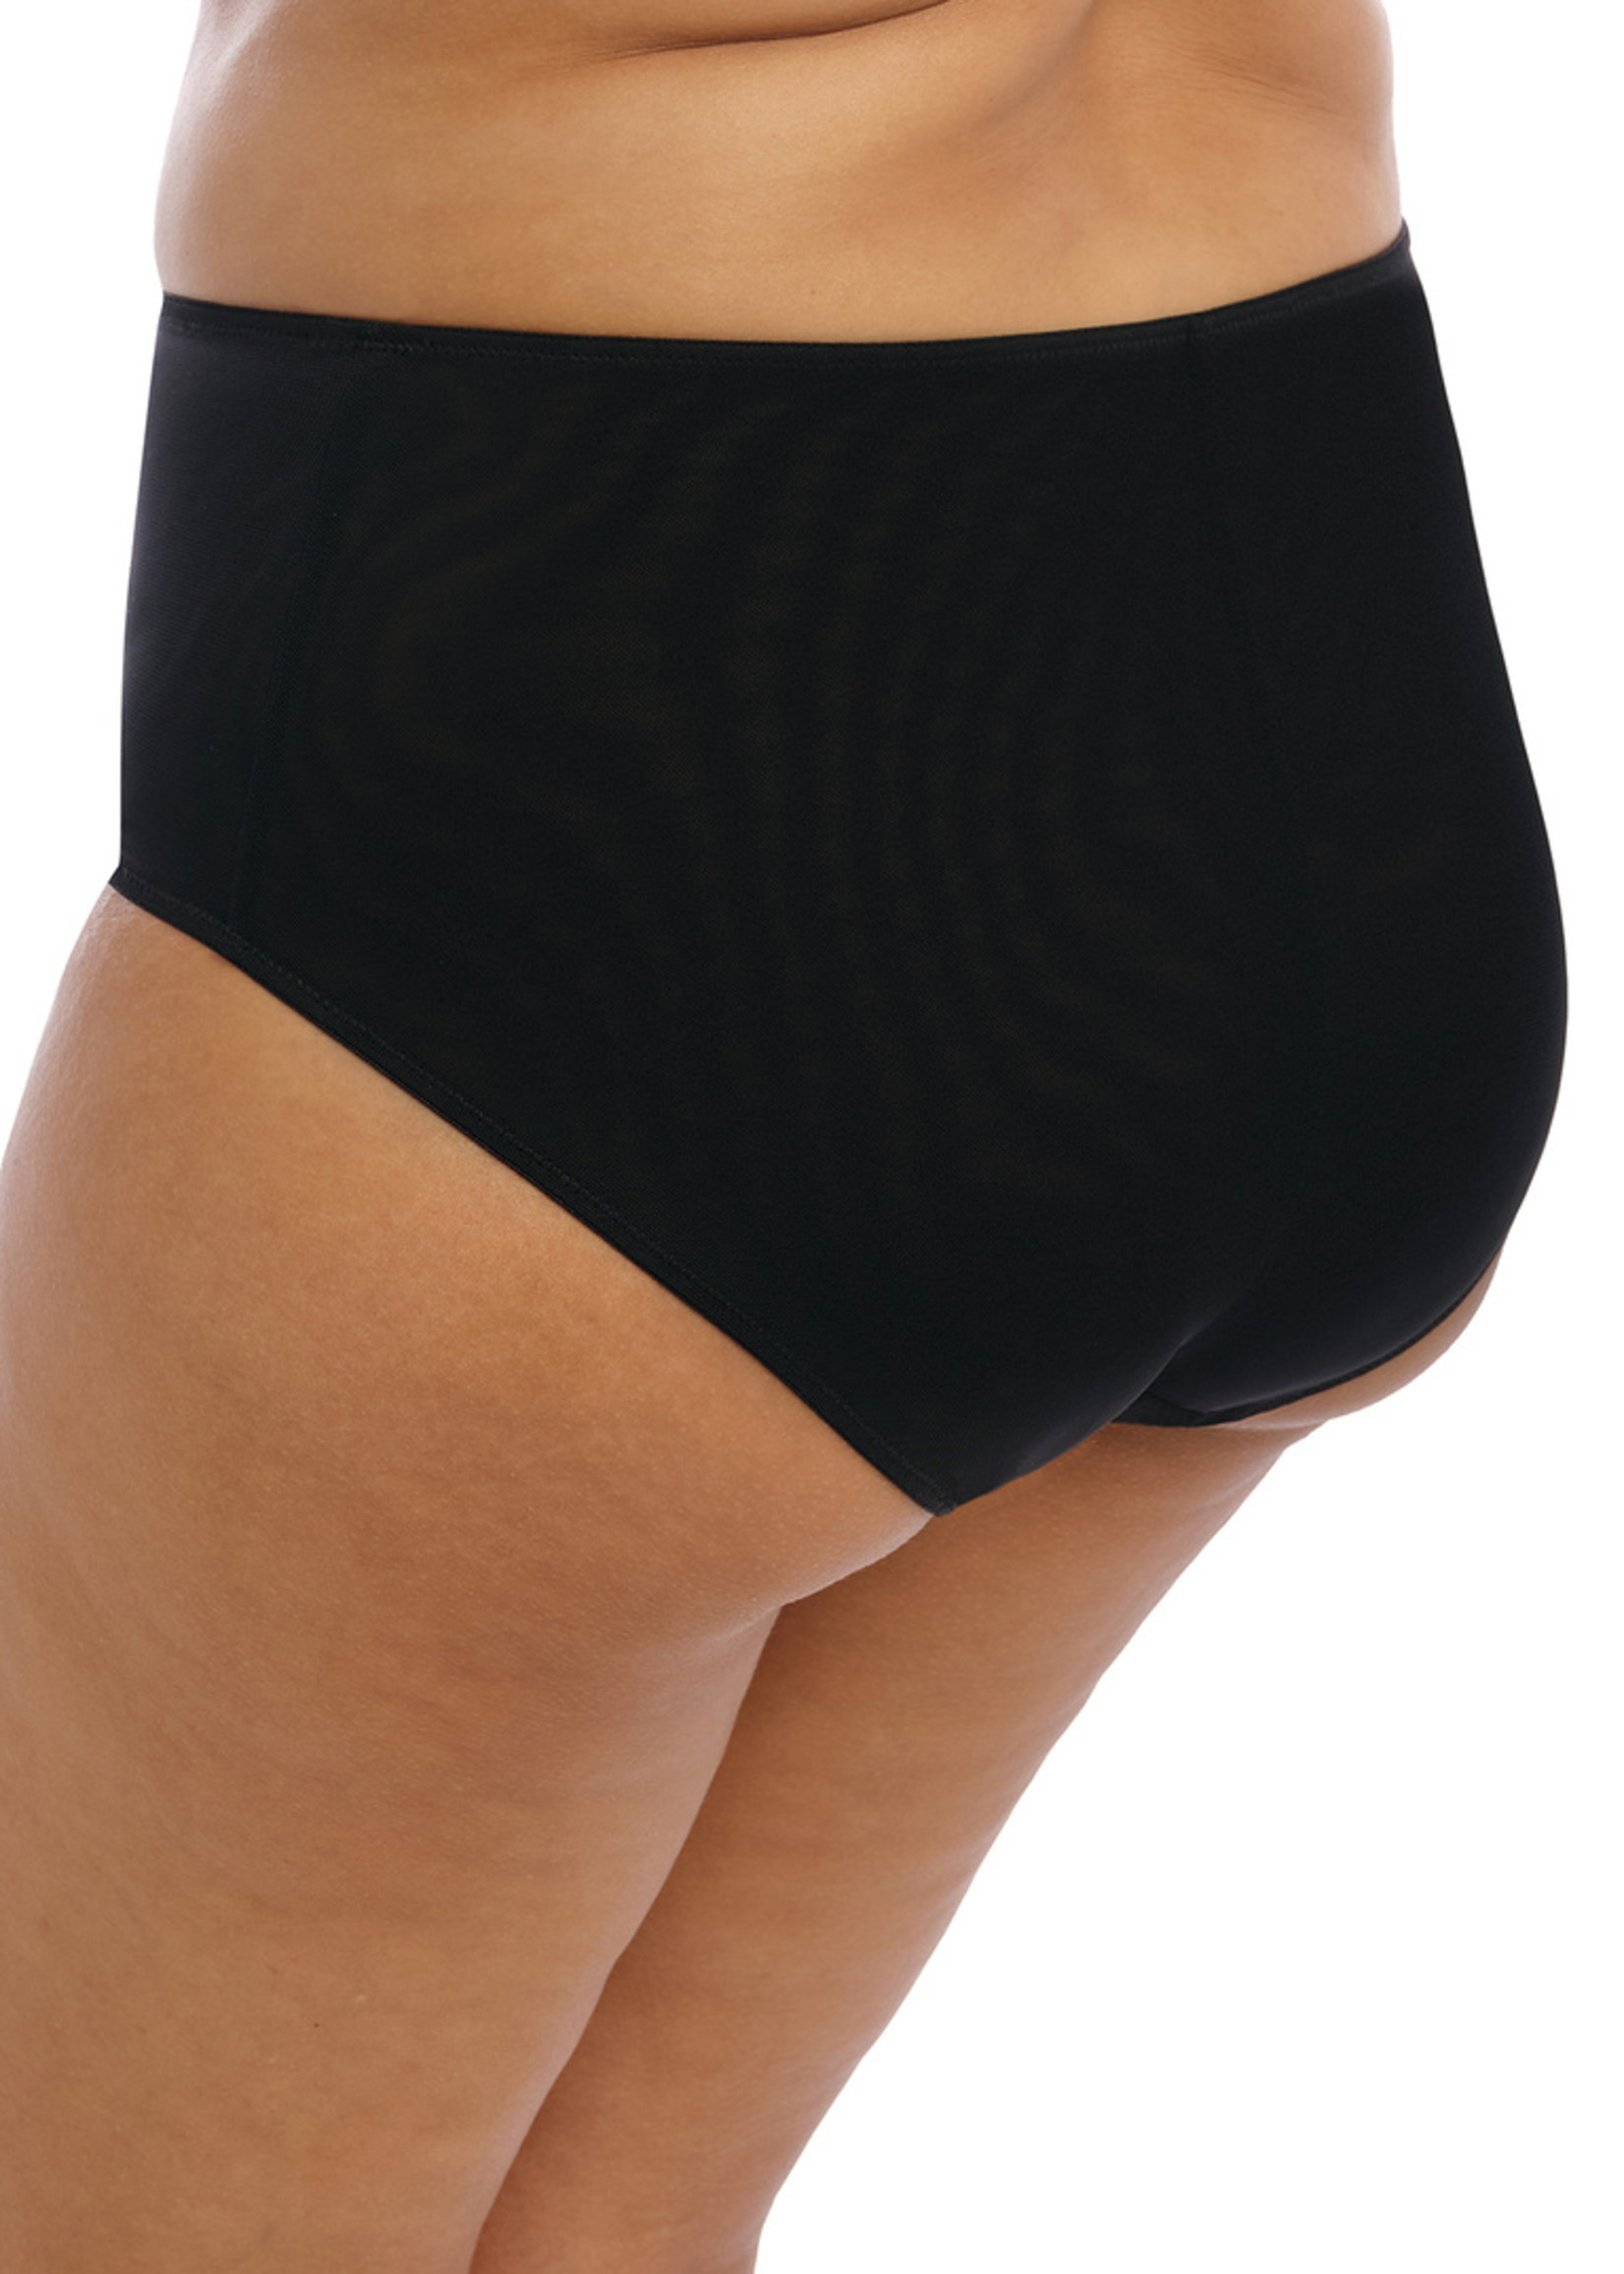 Elomi Sachi Full Brief - Black Butterfly